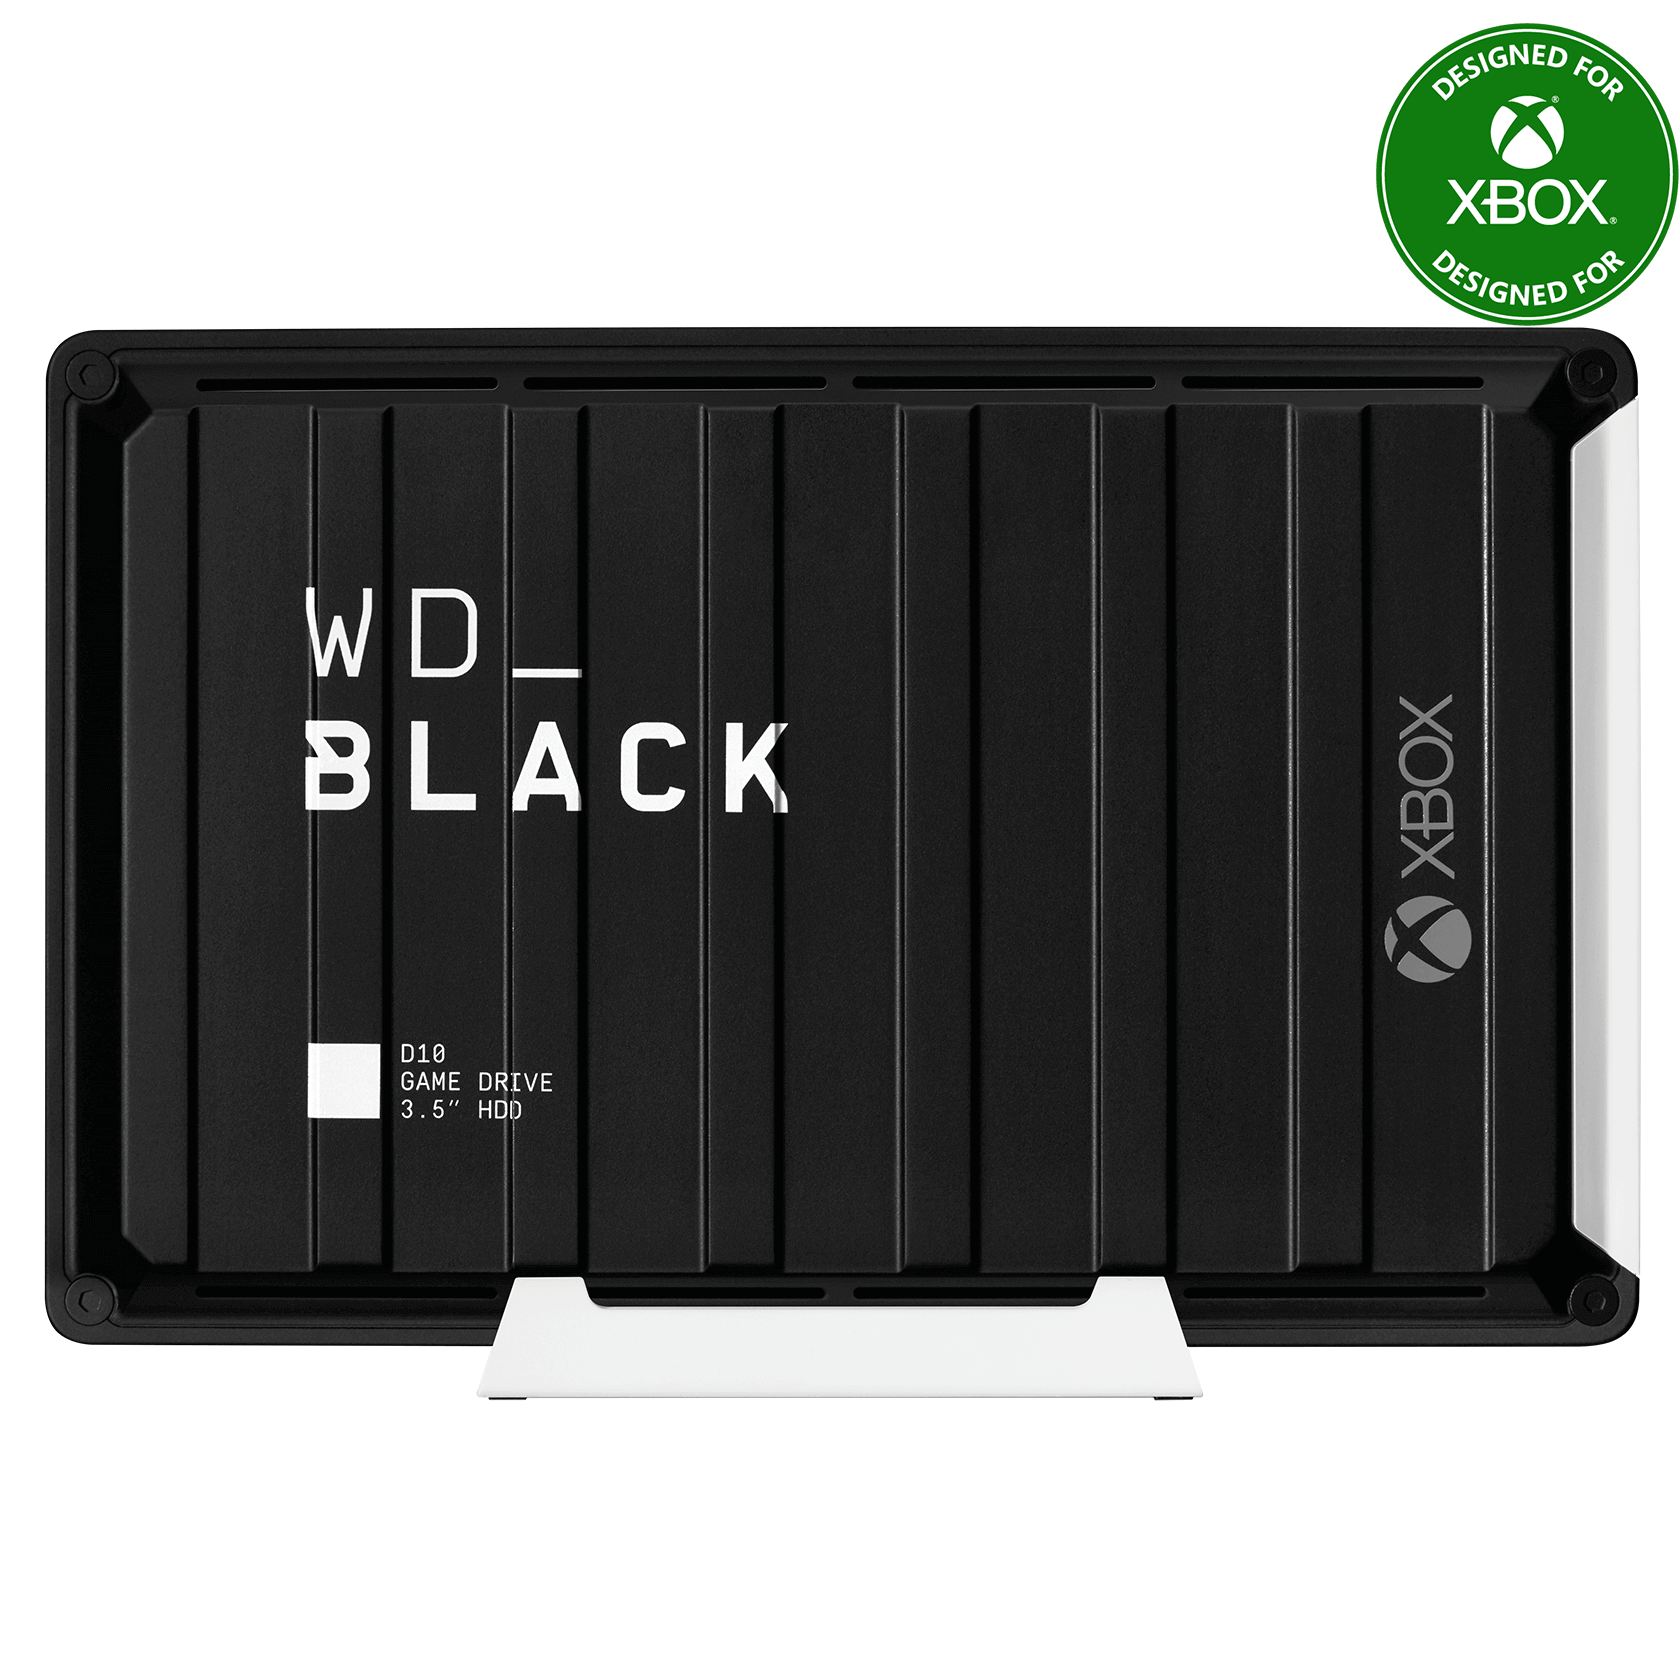 WD_BLACK D10 Game Drive For Xbox One™ 12TB External - WDBA5E0120HBK-NESN